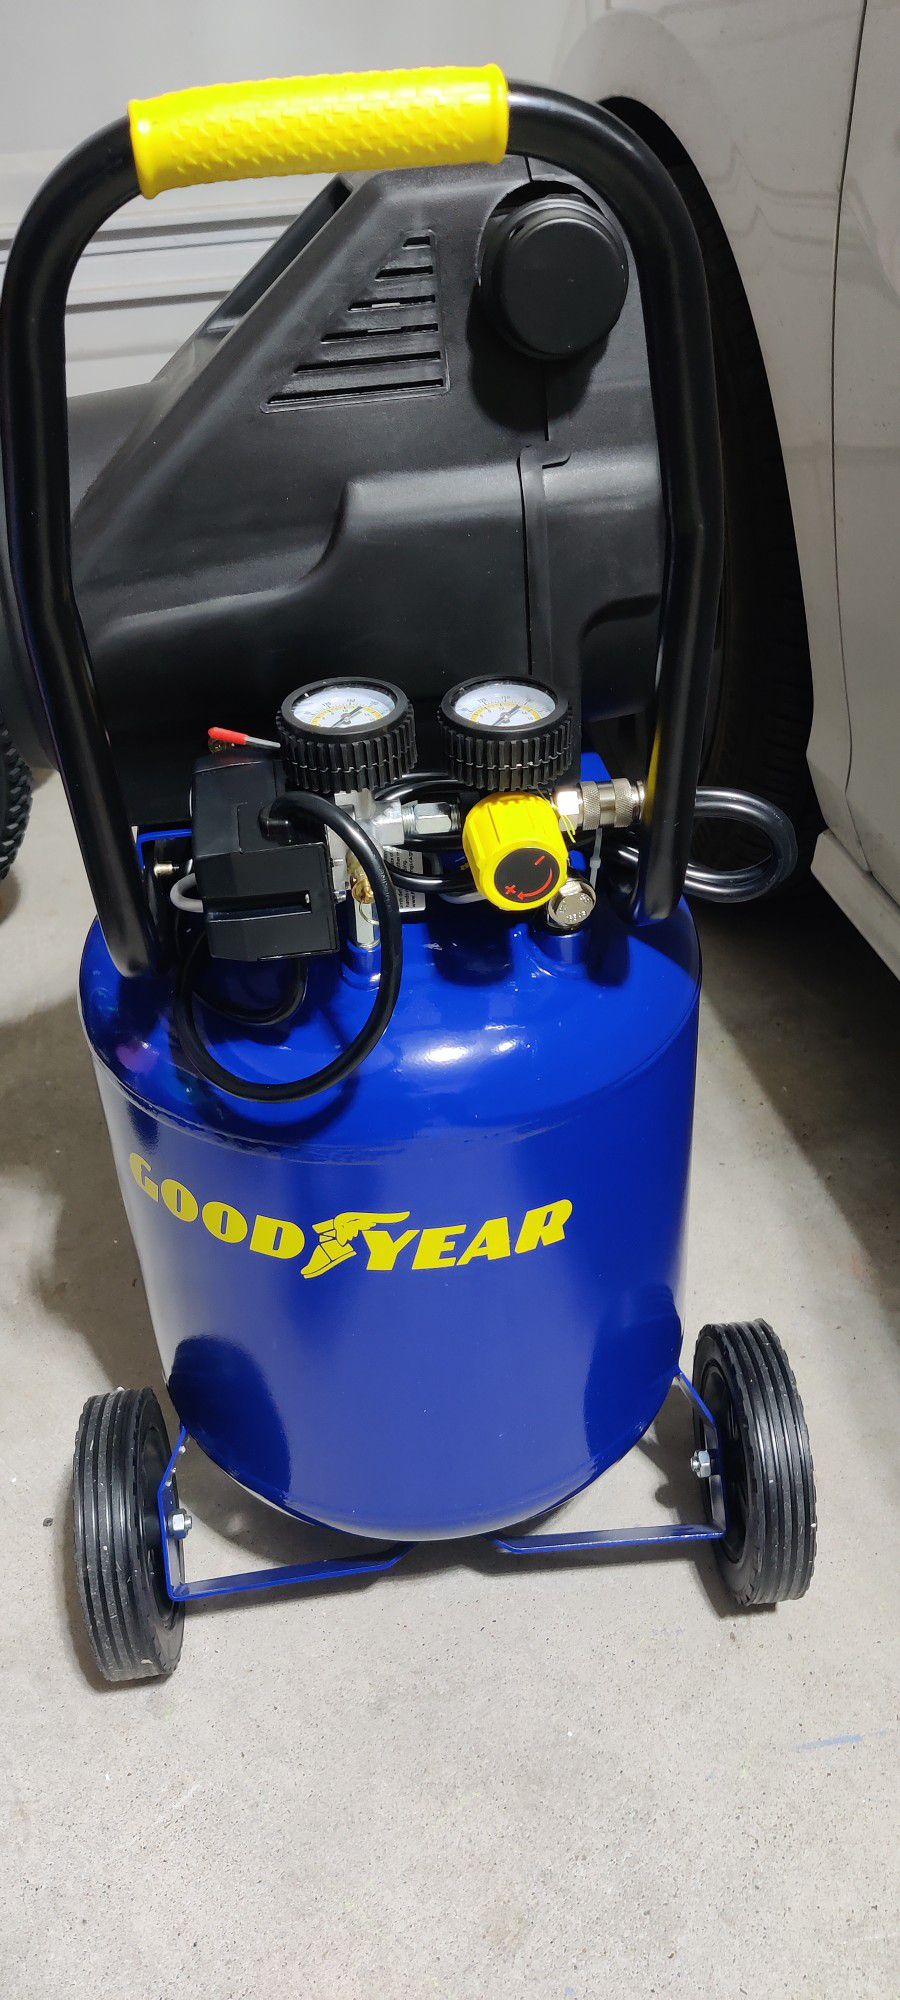 Goodyear 10 Gallon Air Compressor 150 Max PSI With Wheels - New Just Assembled 